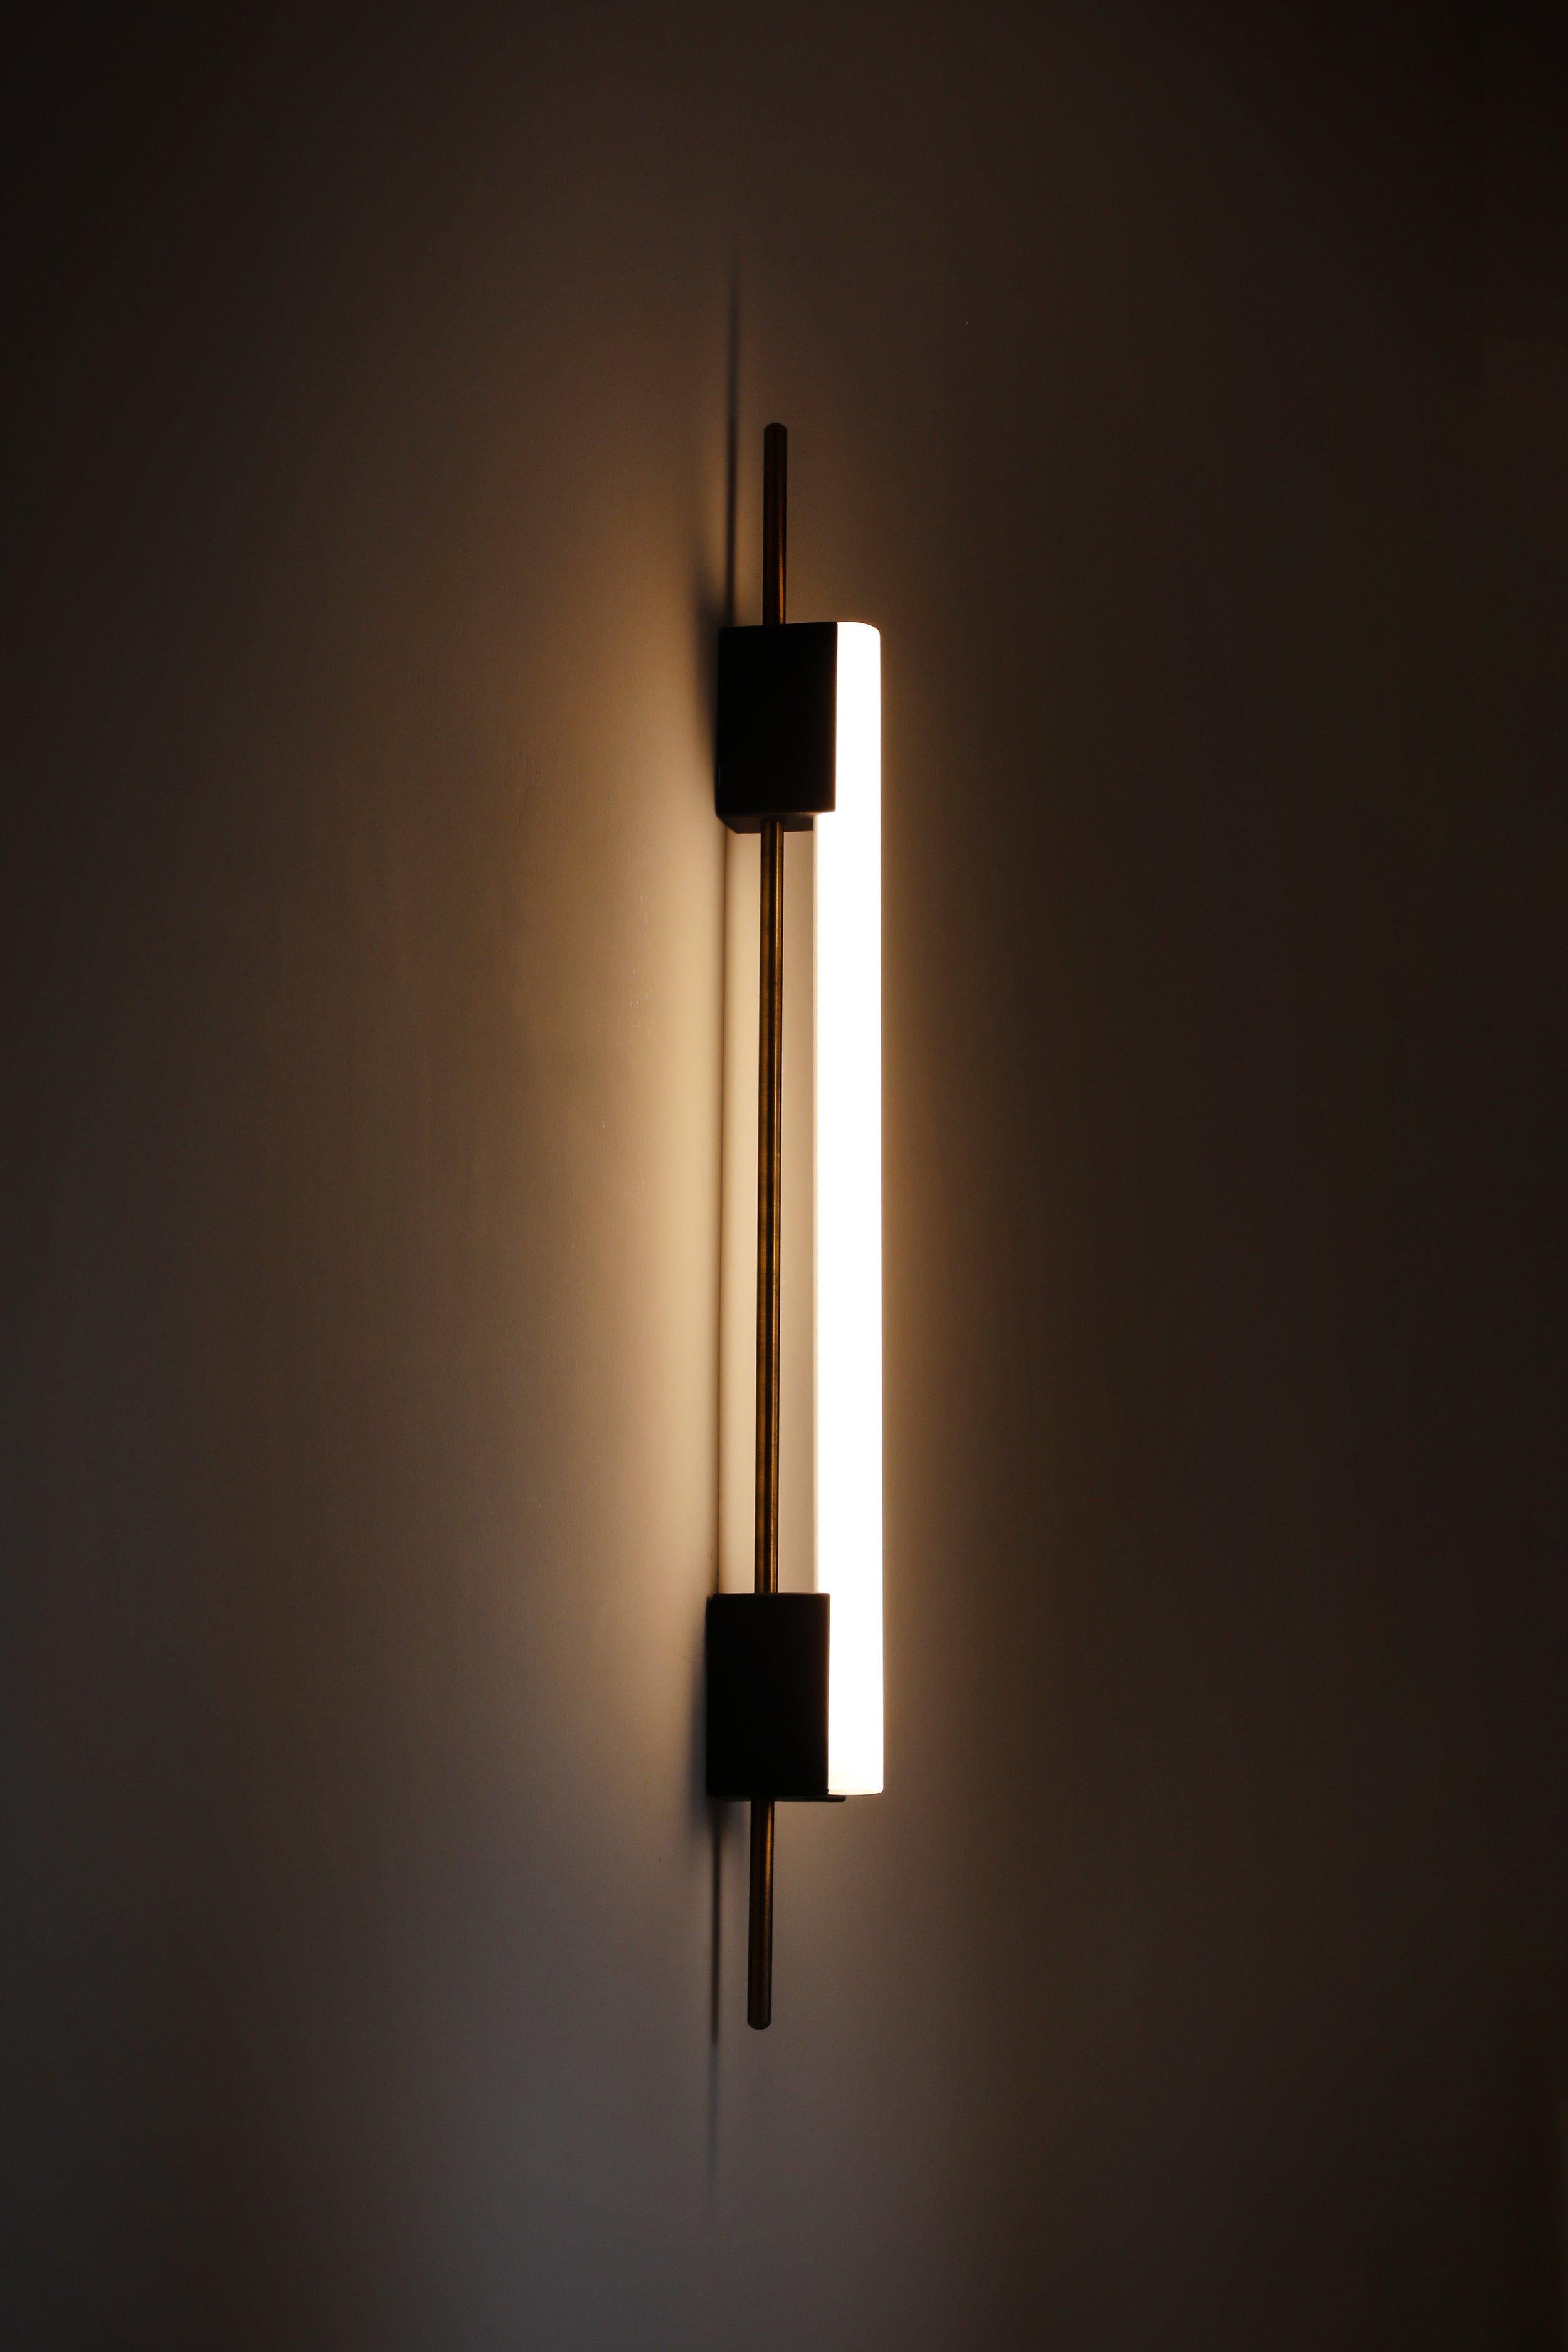 Tubus 70 wall light by Contain.
Dimensions: D 3.2 x W 70 x H 7.5 cm.
Materials: brass and 3D printed PLA structure.
Available in different finishes. 

All our lamps can be wired according to each country. If sold to the USA it will be wired for